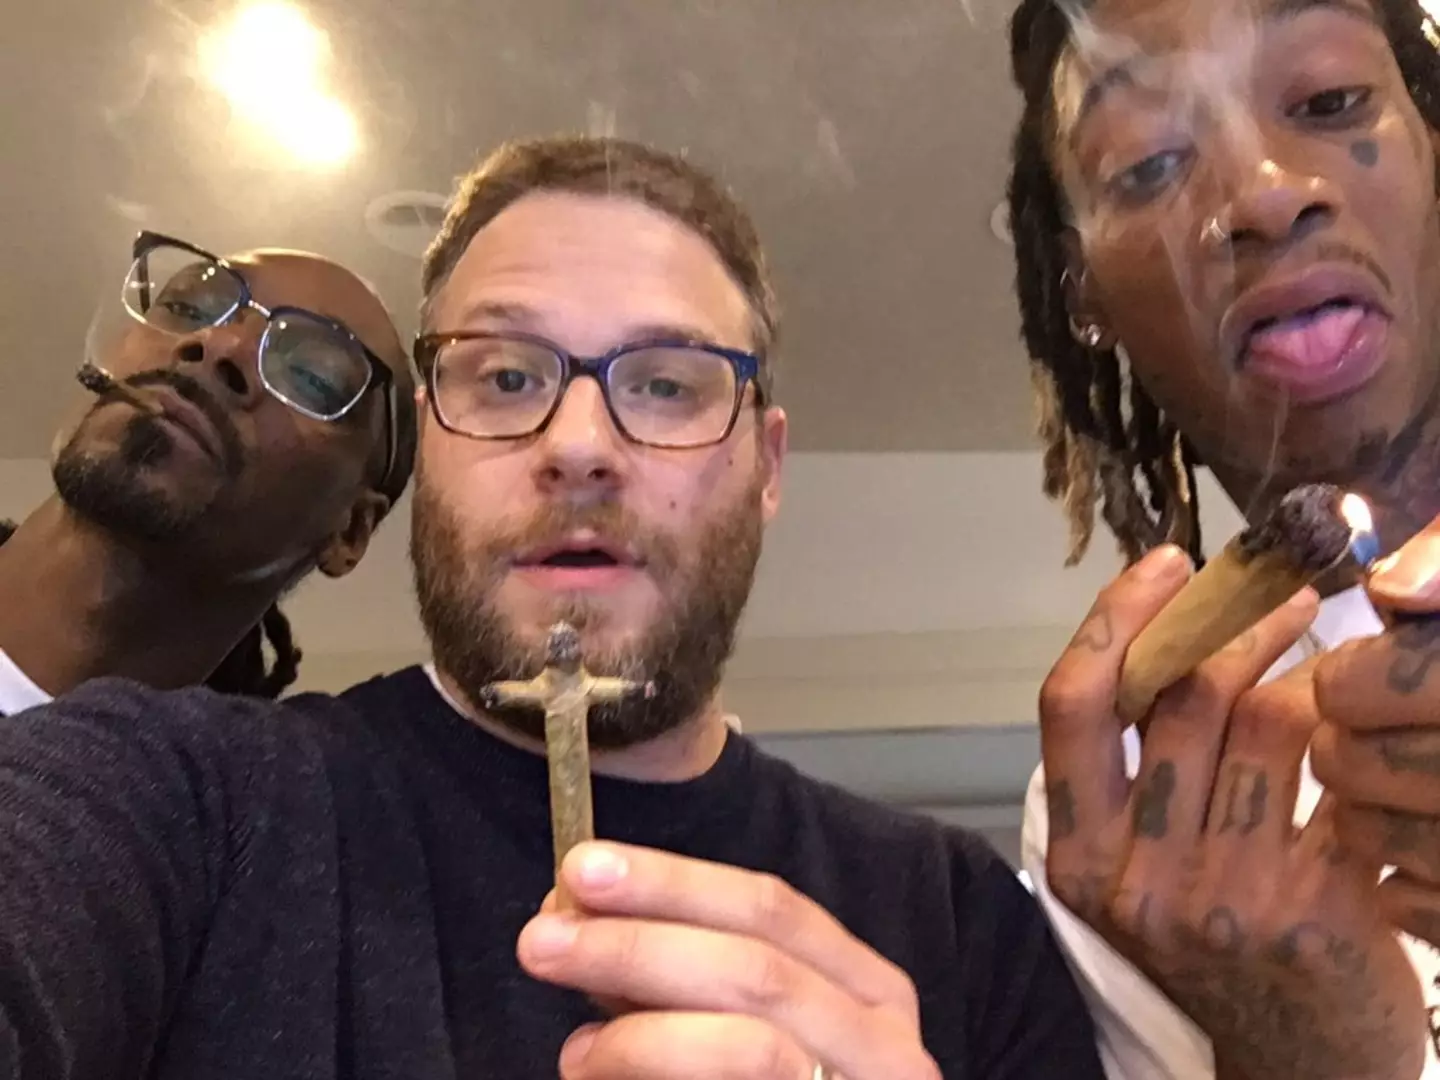 Rogen and Snoop are known to enjoy puffing on cross joints together.